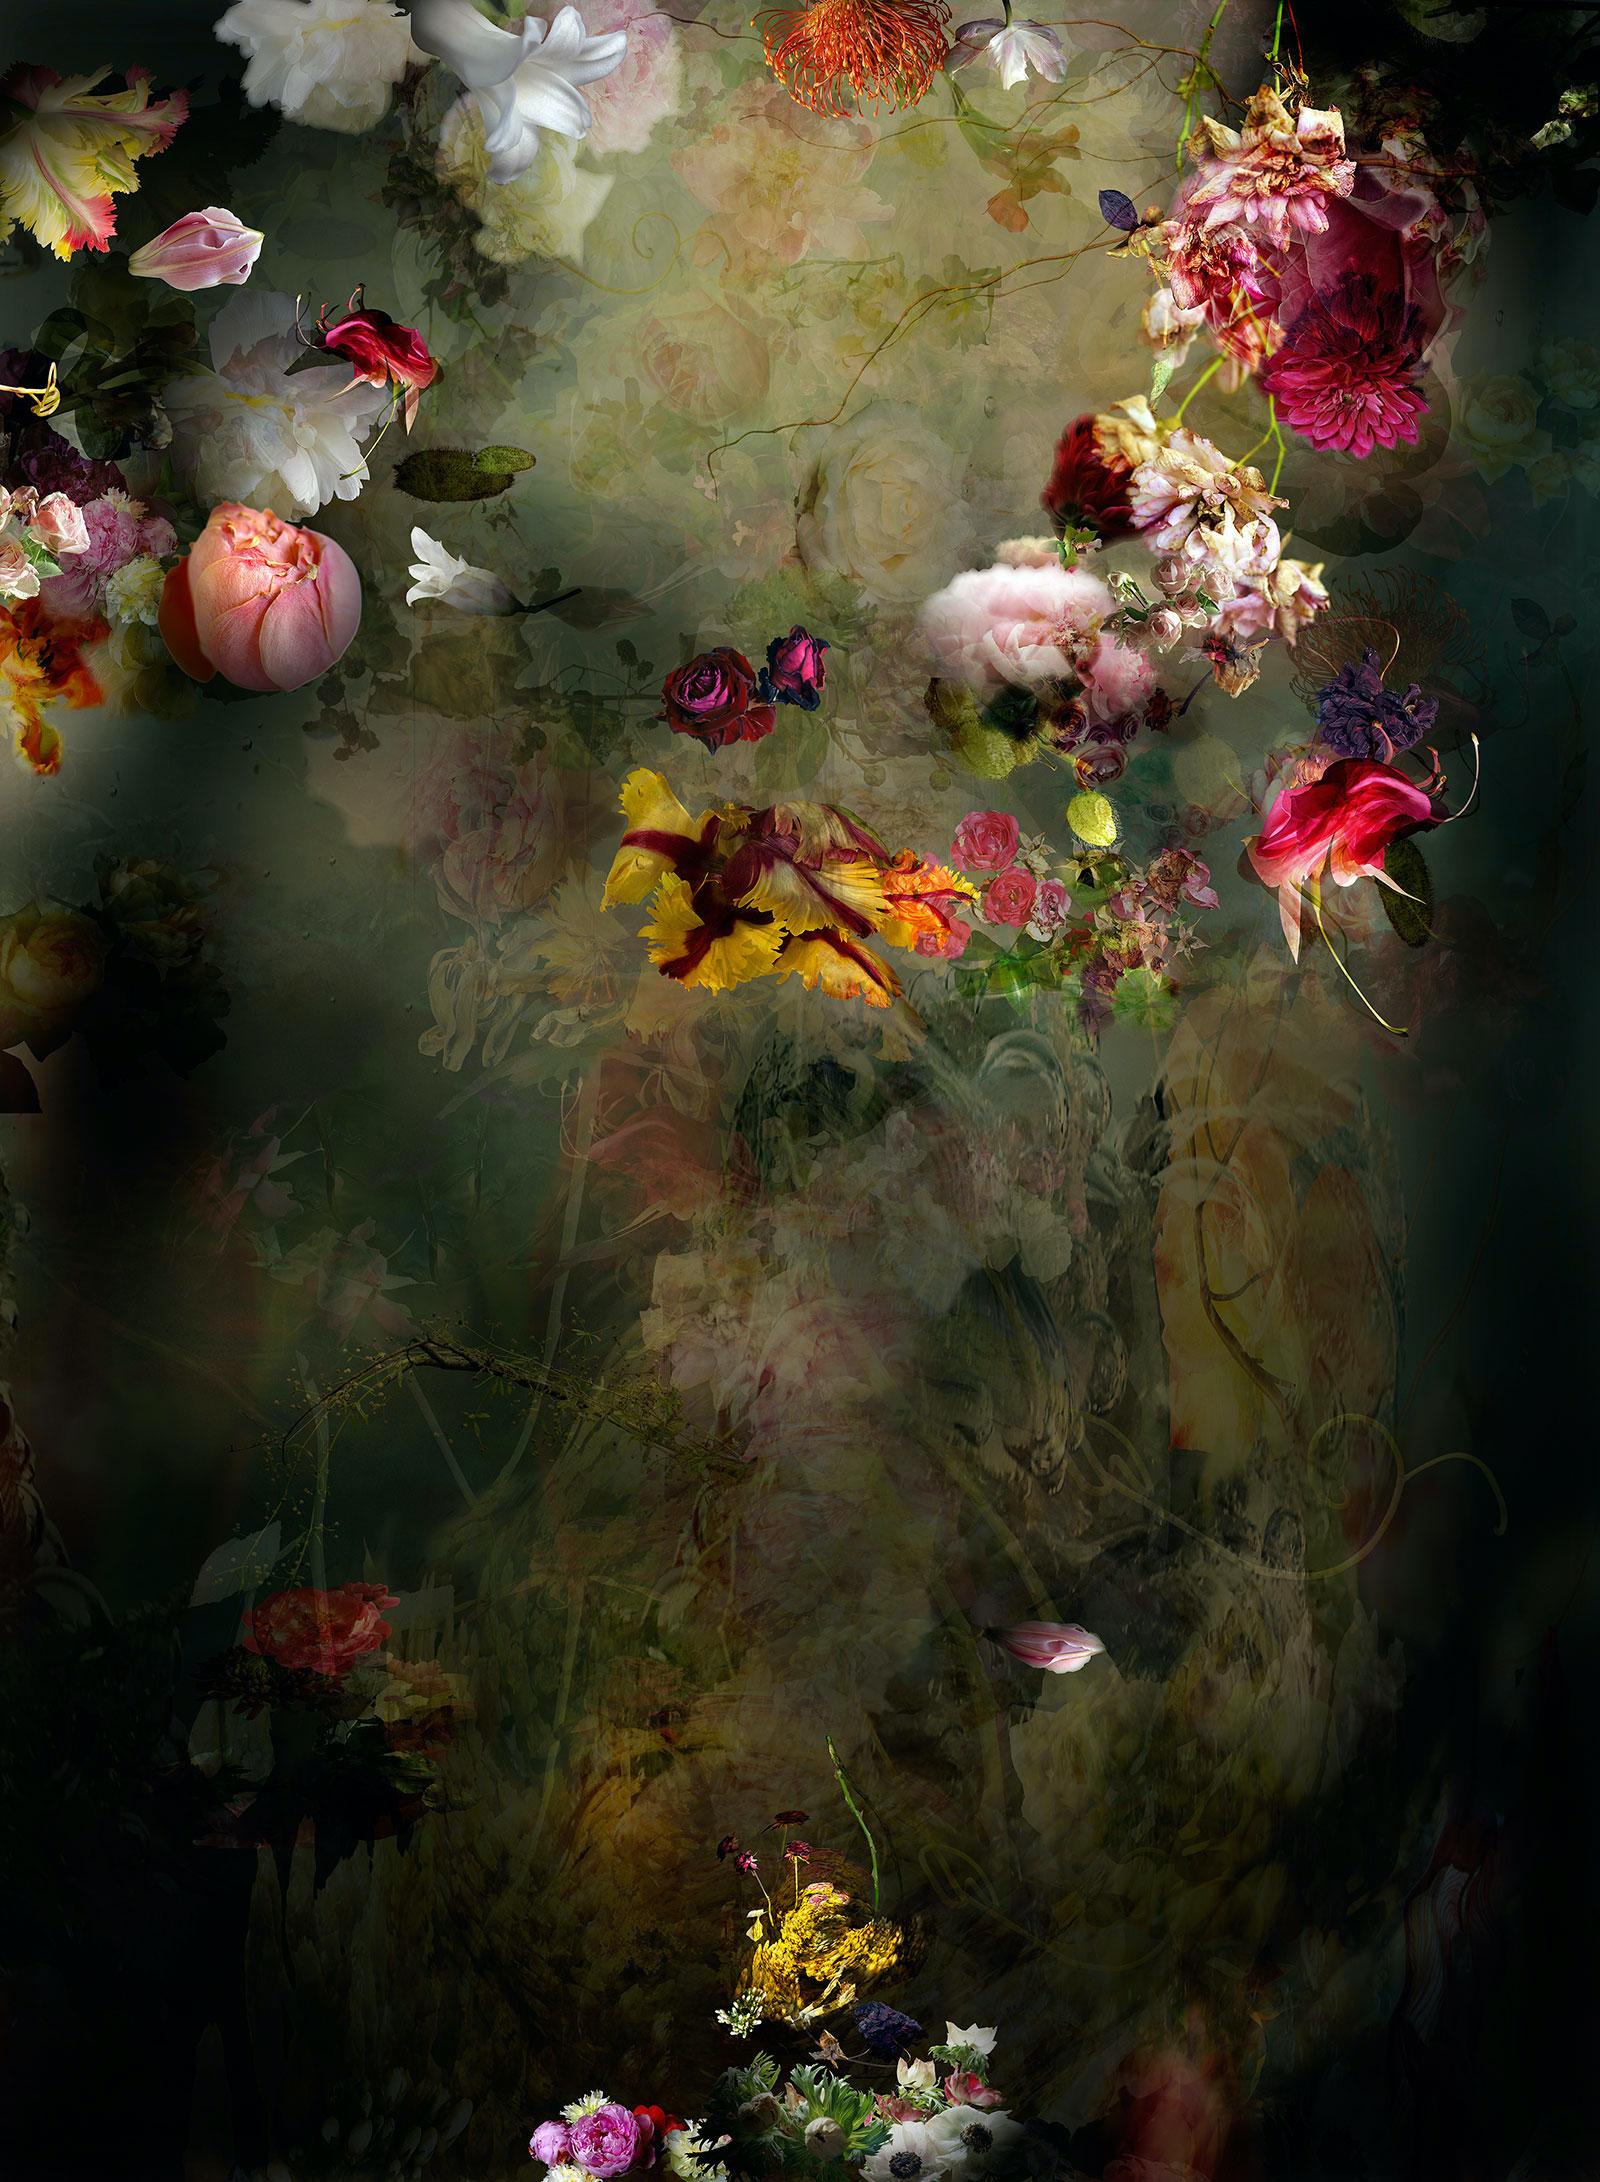 Isabelle Menin Still-Life Photograph - Solstice #6 - Vertical Floral dark abstract landscape contemporary photograph